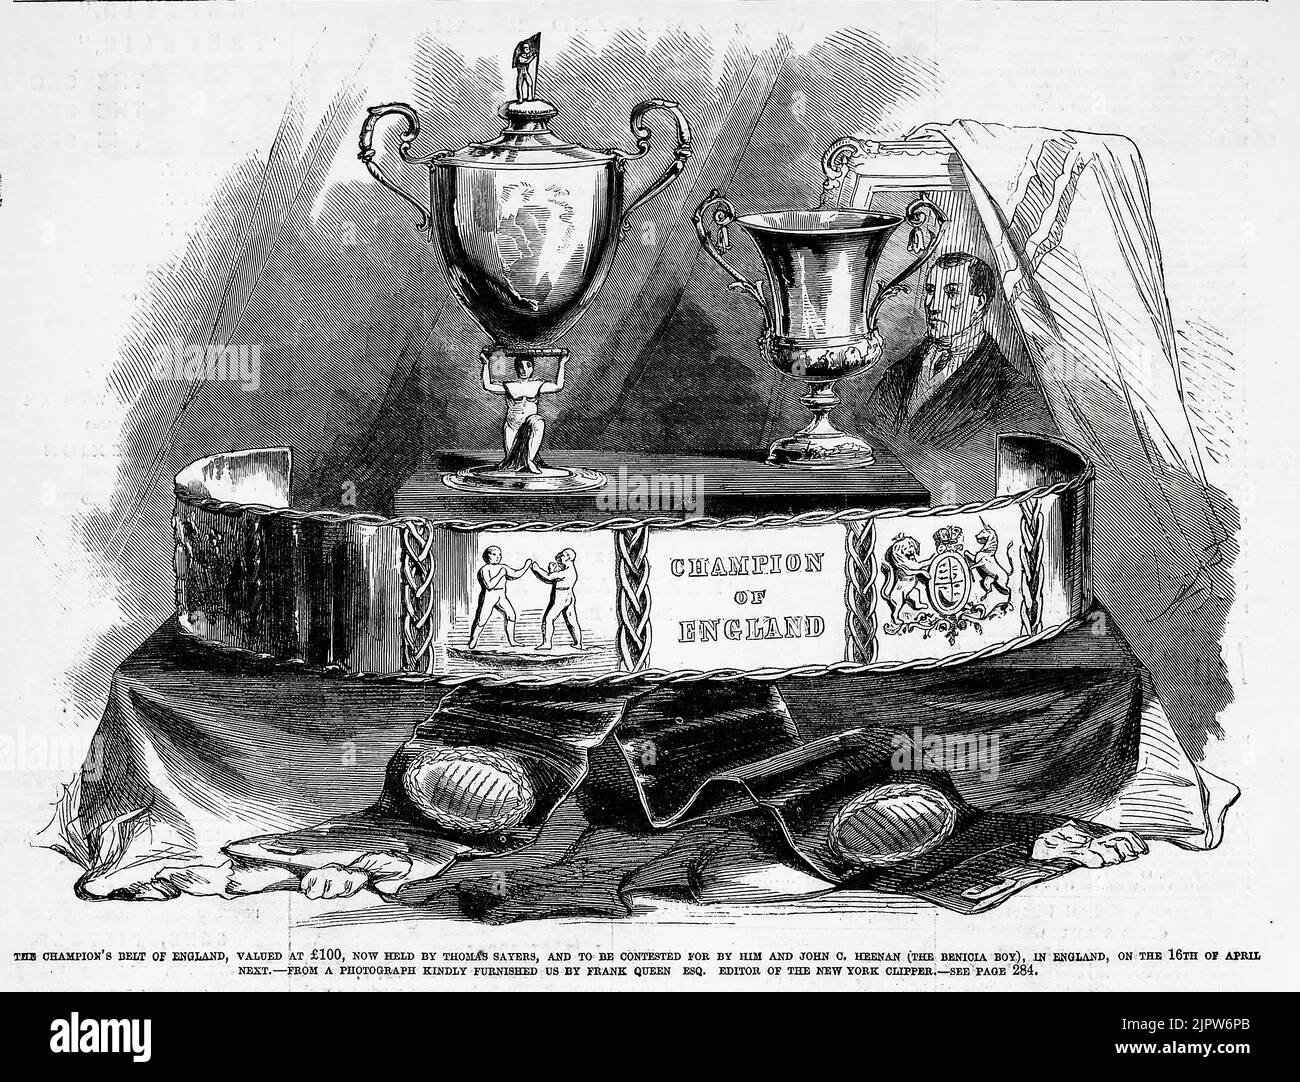 The Champion's Belt of England, valued at £100, now held by Thomas Sayers, and to be contested for by him and John C. Heenan (The Benicia Boy), in England, April 16th, 1860. 19th century illustration from Frank Leslie's Illustrated Newspaper Stock Photo